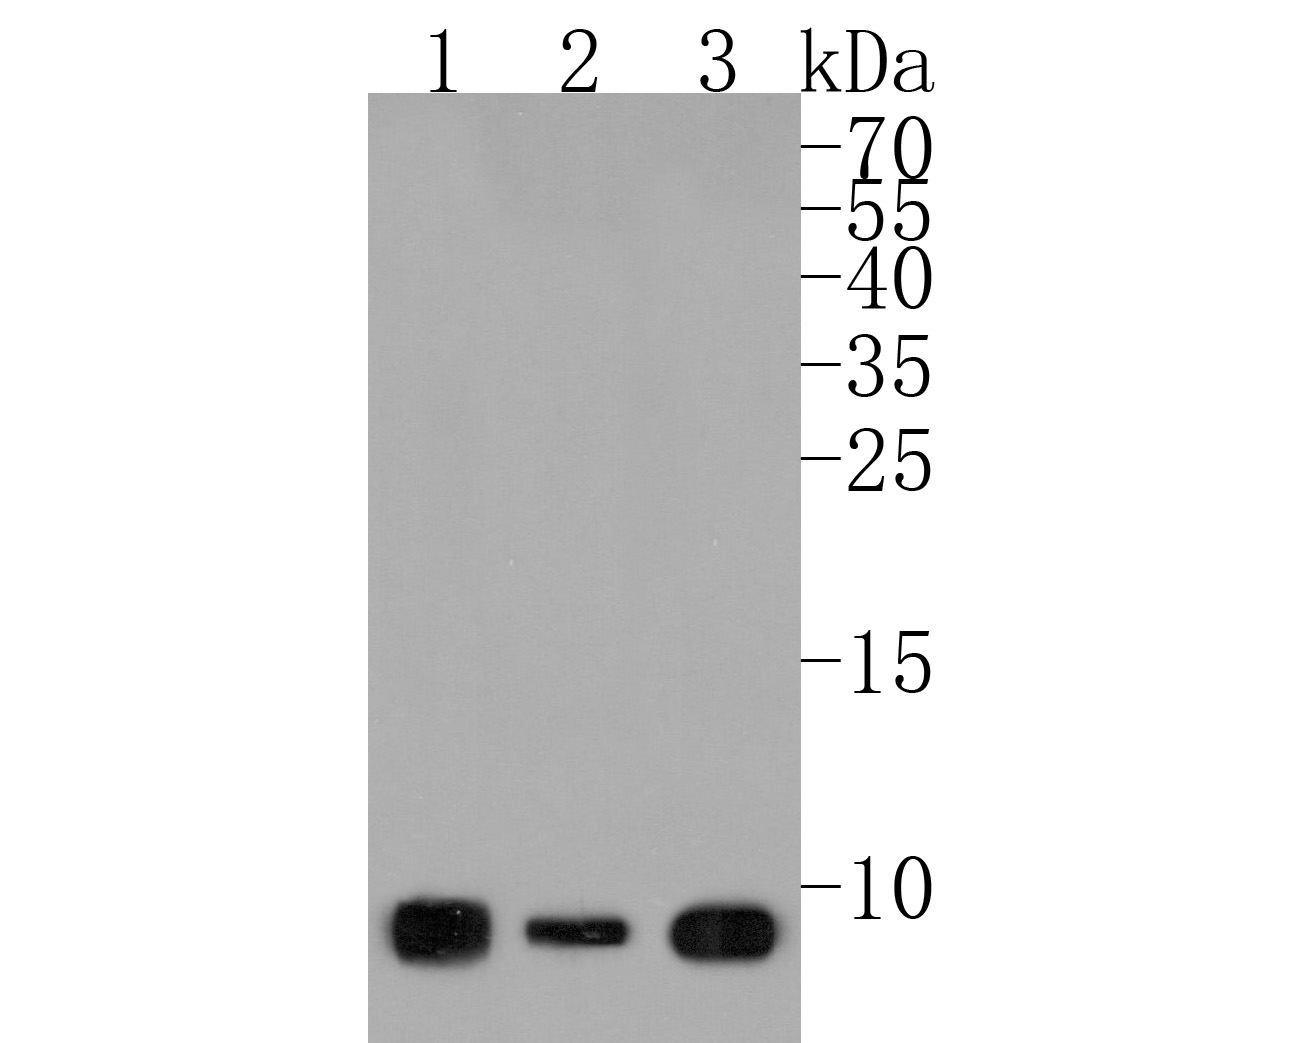 Western blot analysis of Cytochrome b-c1 complex subunit 9/UQCR10 on different lysates. Proteins were transferred to a PVDF membrane and blocked with 5% BSA in PBS for 1 hour at room temperature. The primary antibody (HA500222, 1/500) was used in 5% BSA at room temperature for 2 hours. Goat Anti-Rabbit IgG - HRP Secondary Antibody (HA1001) at 1:200,000 dilution was used for 1 hour at room temperature.<br />
Positive control: <br />
Lane 1: MCF-7 cell lysate<br />
Lane 2: Human skeletal muscle tissue lysate<br />
Lane 3: Hela cell lysate